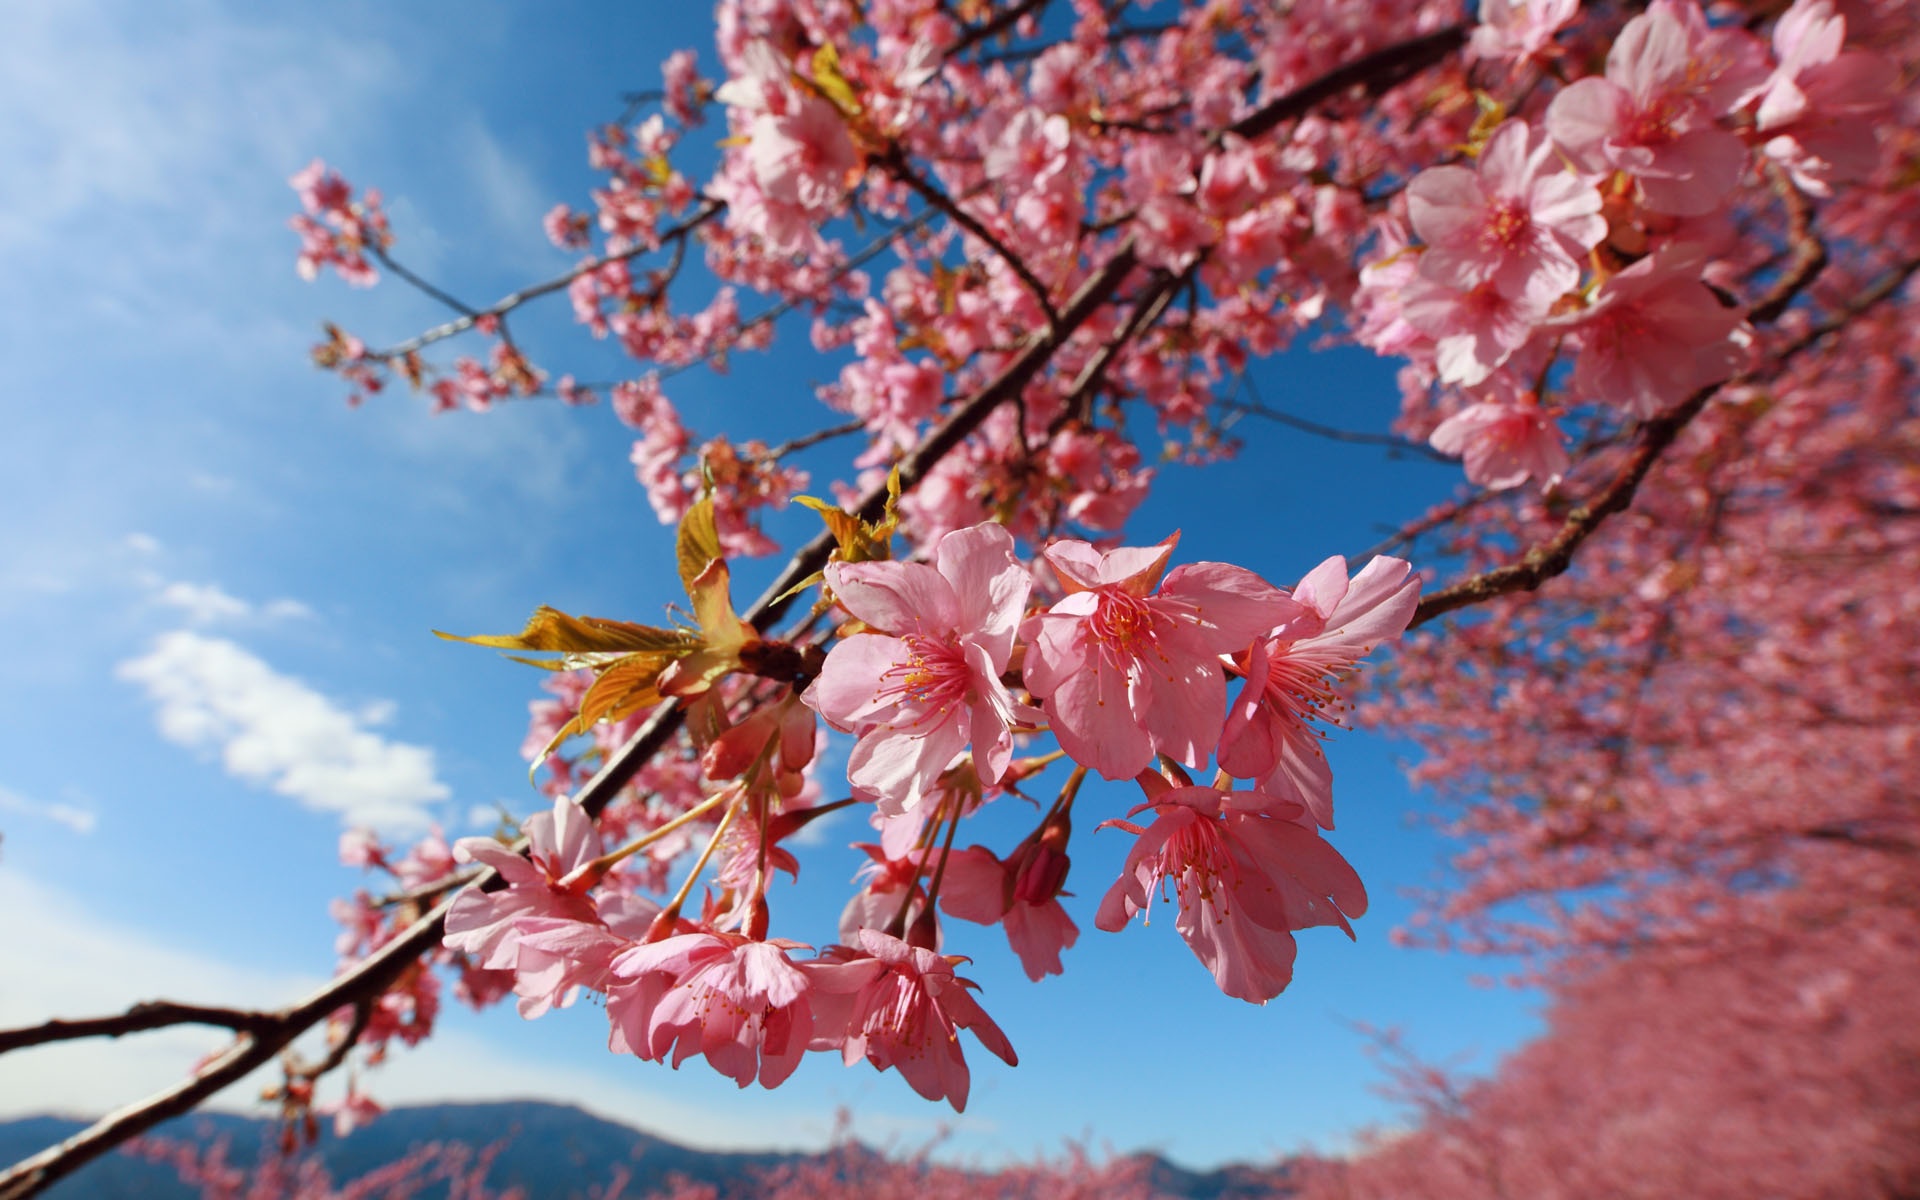 great Sky and pink cherry blossom picture backgrounds